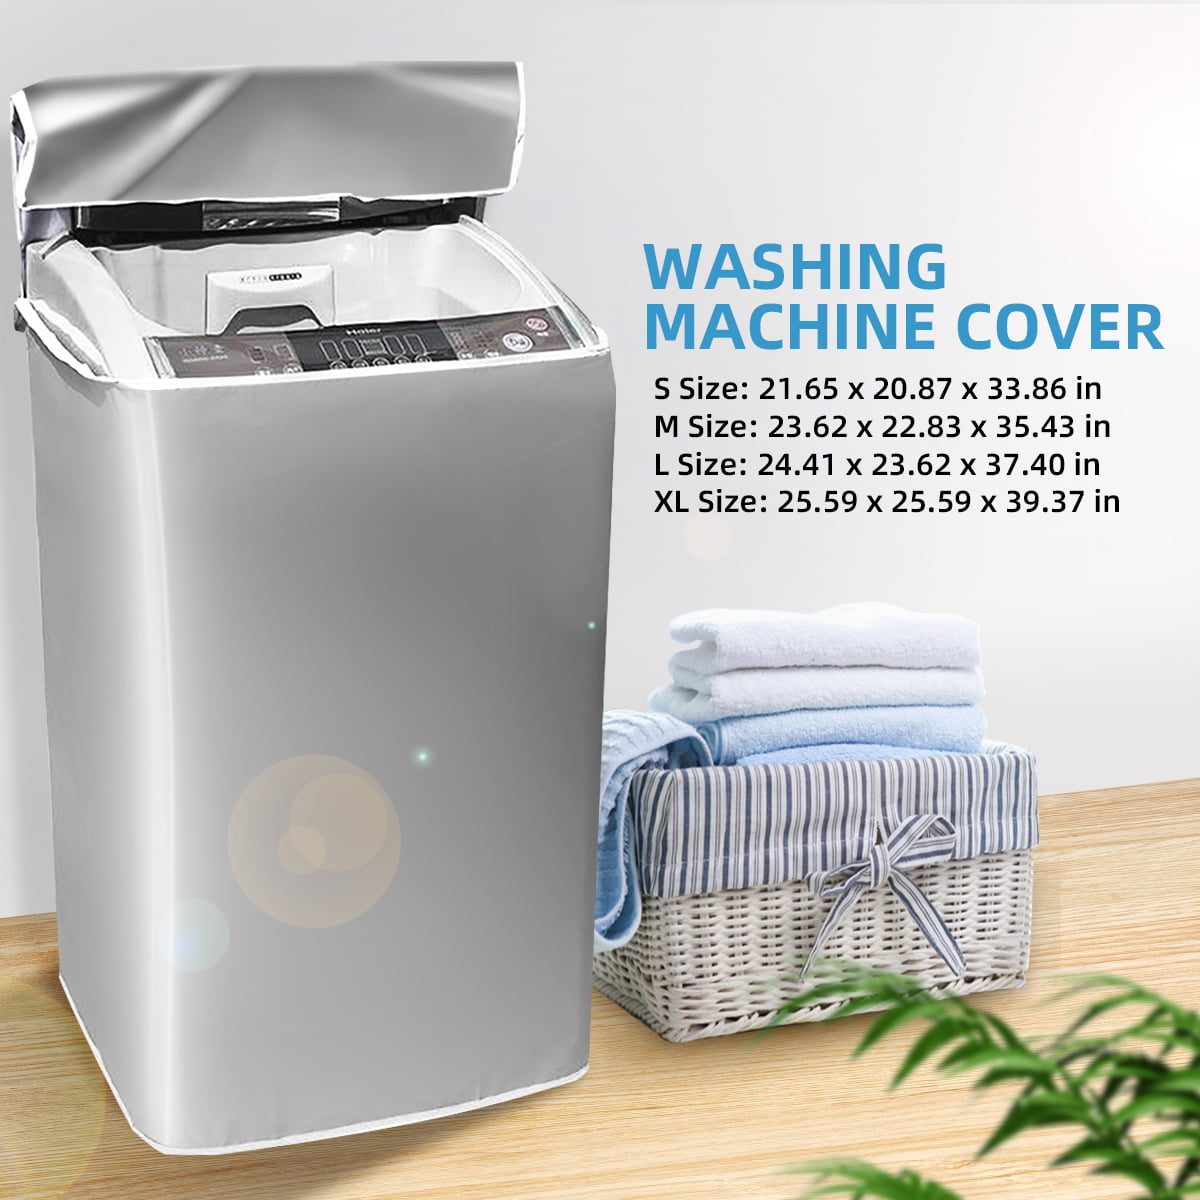 Washing Machine Protect Cover Laundry Dryer Dustproof Waterproof Case Home Use 